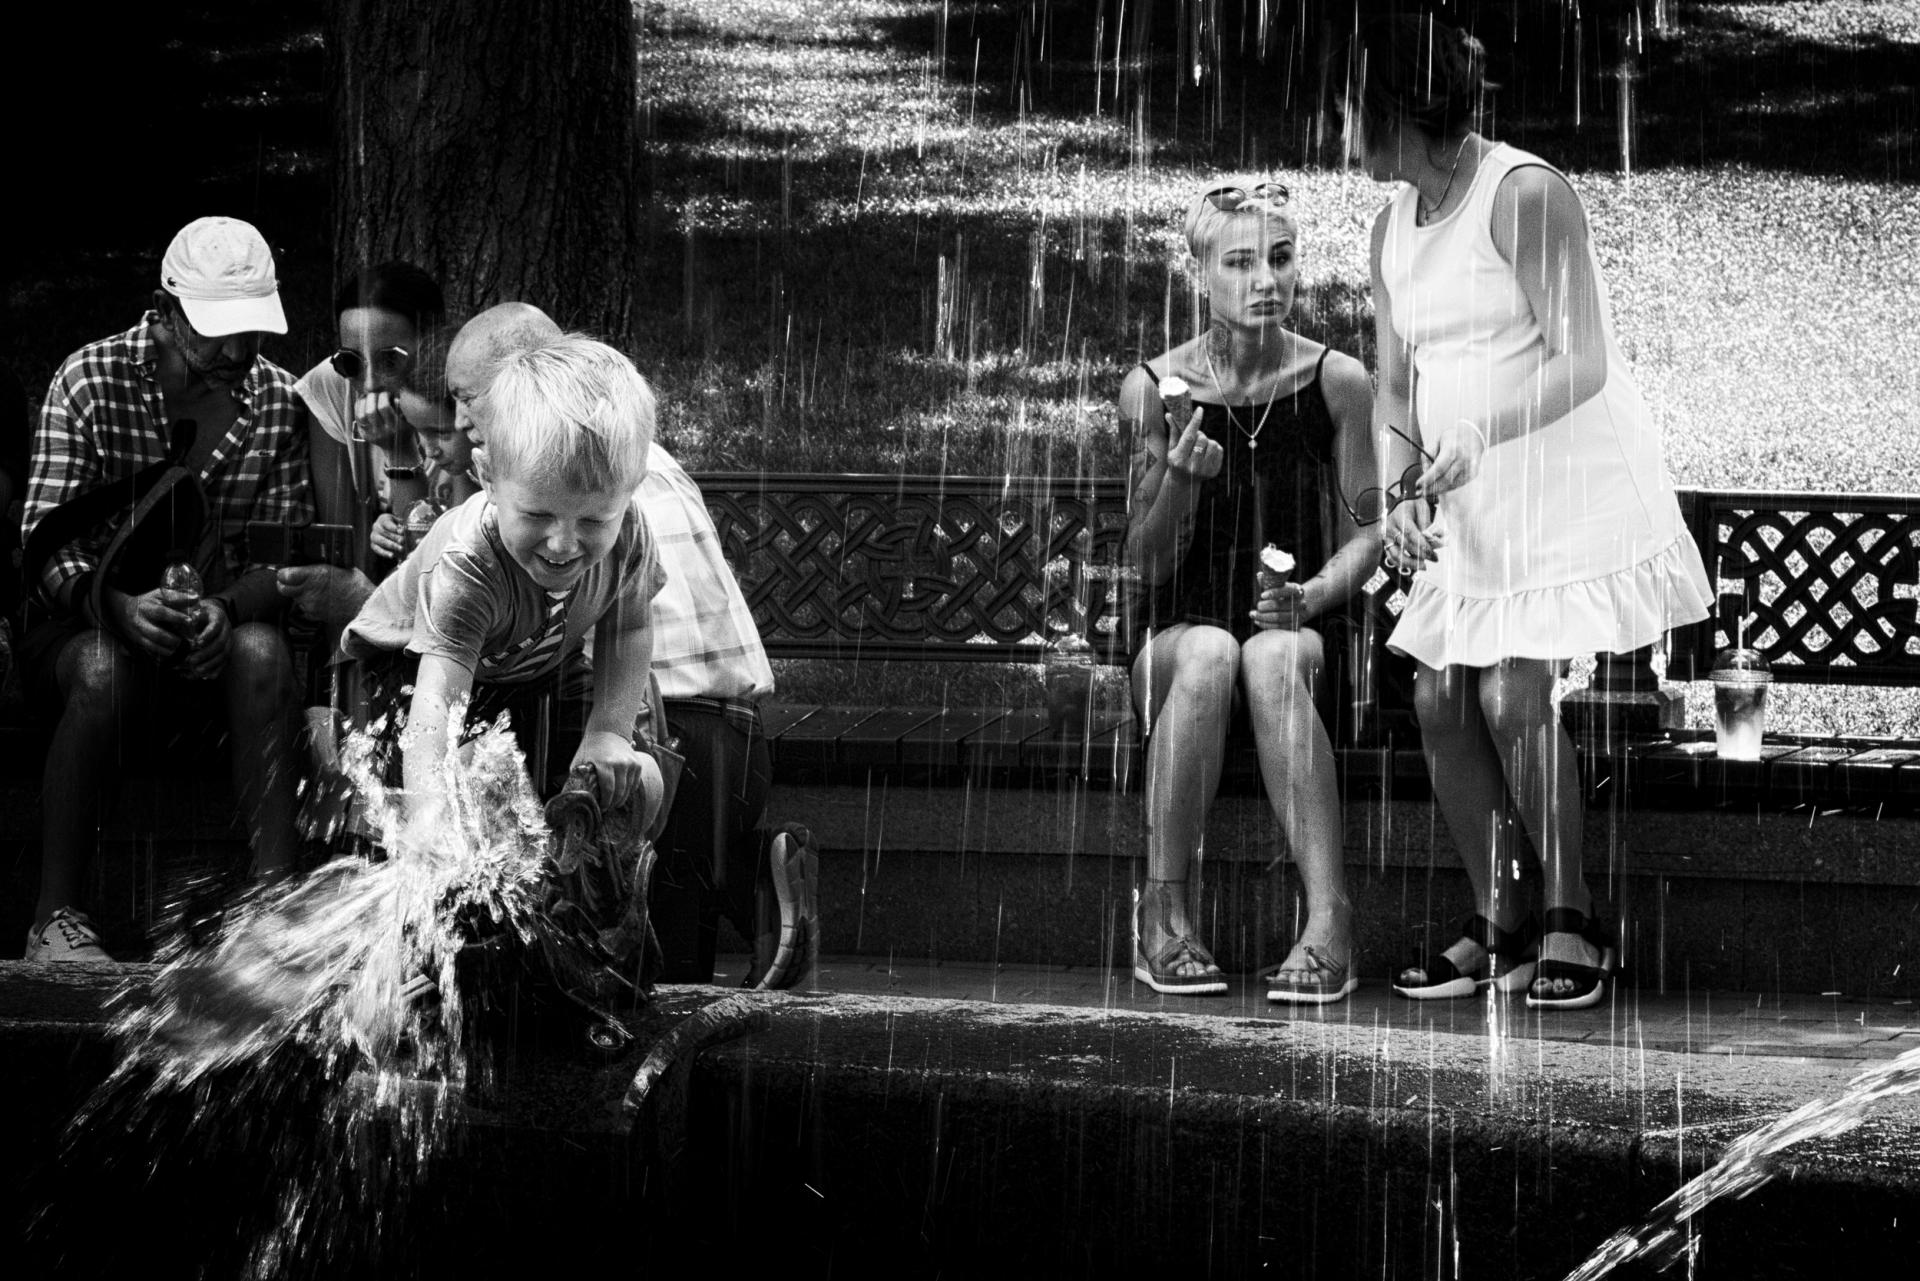 New York Photography Awards Winner - A summer day by the fountain